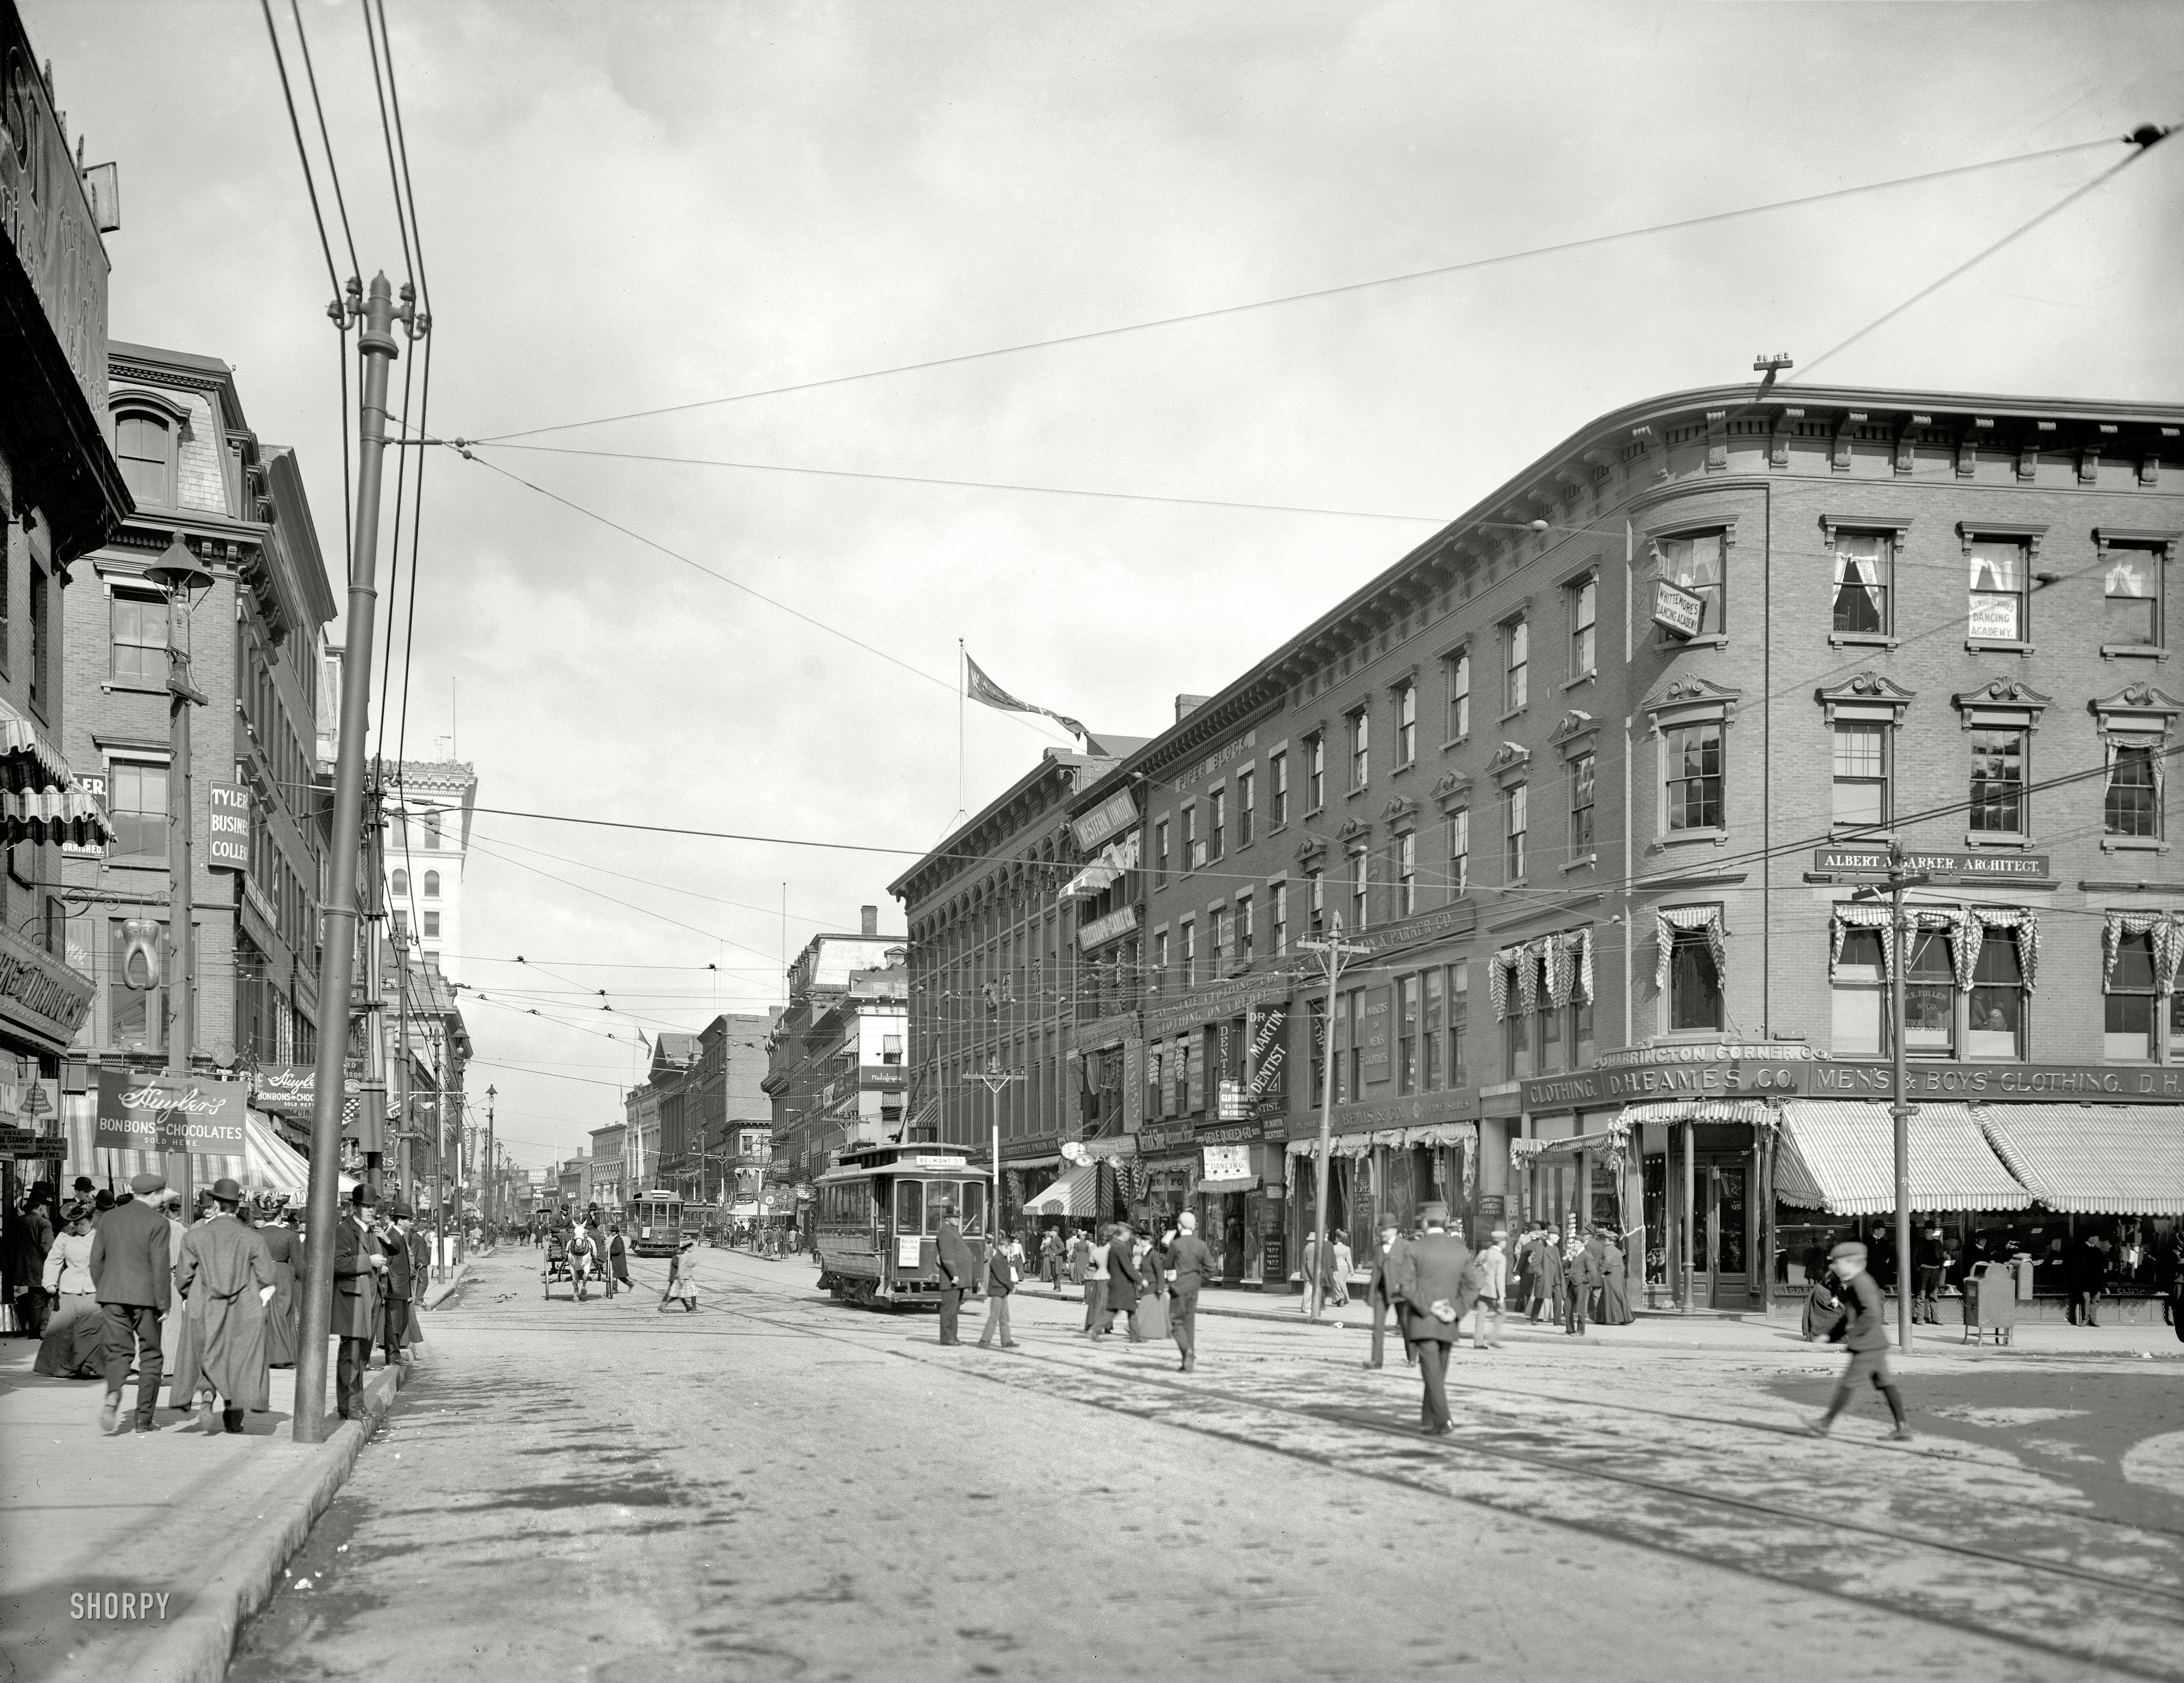 Circa 1906. "Main Street, Worcester, Massachusetts." Bonbons and dance lessons are among the goods and services on offer in this bustling burg. View full size.